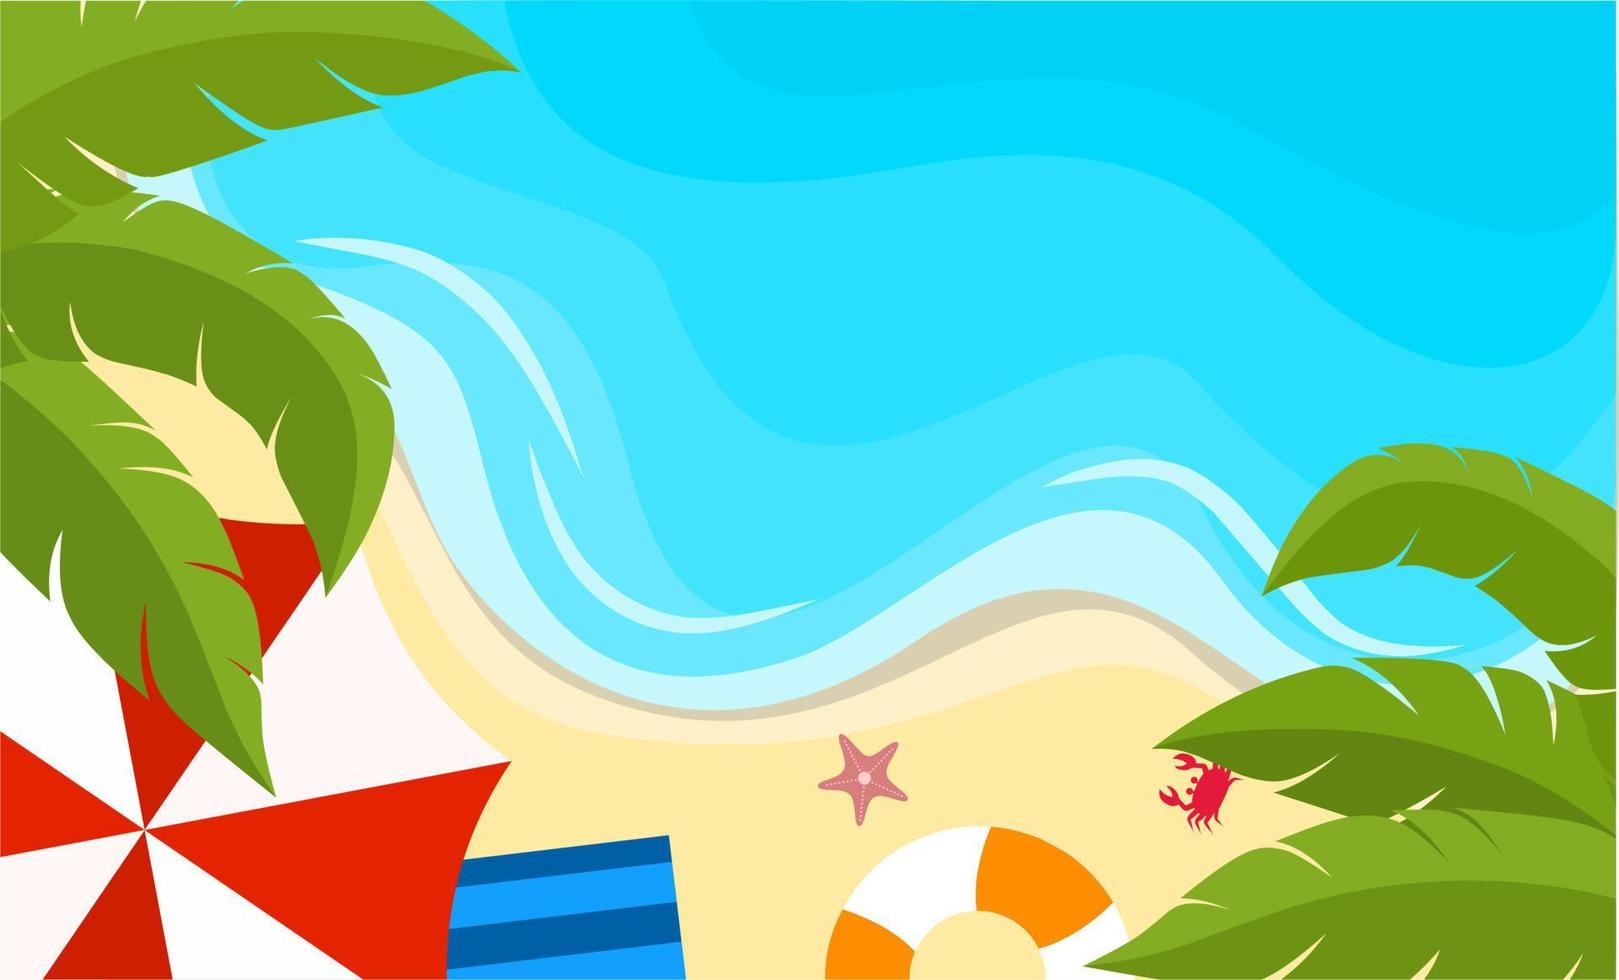 https://static.vecteezy.com/system/resources/previews/008/014/113/non_2x/summer-background-flat-design-with-beach-view-summer-vacation-poster-illustration-of-tropical-beach-with-umbrella-swim-ring-palm-leaf-starfish-crab-and-sea-free-vector.jpg